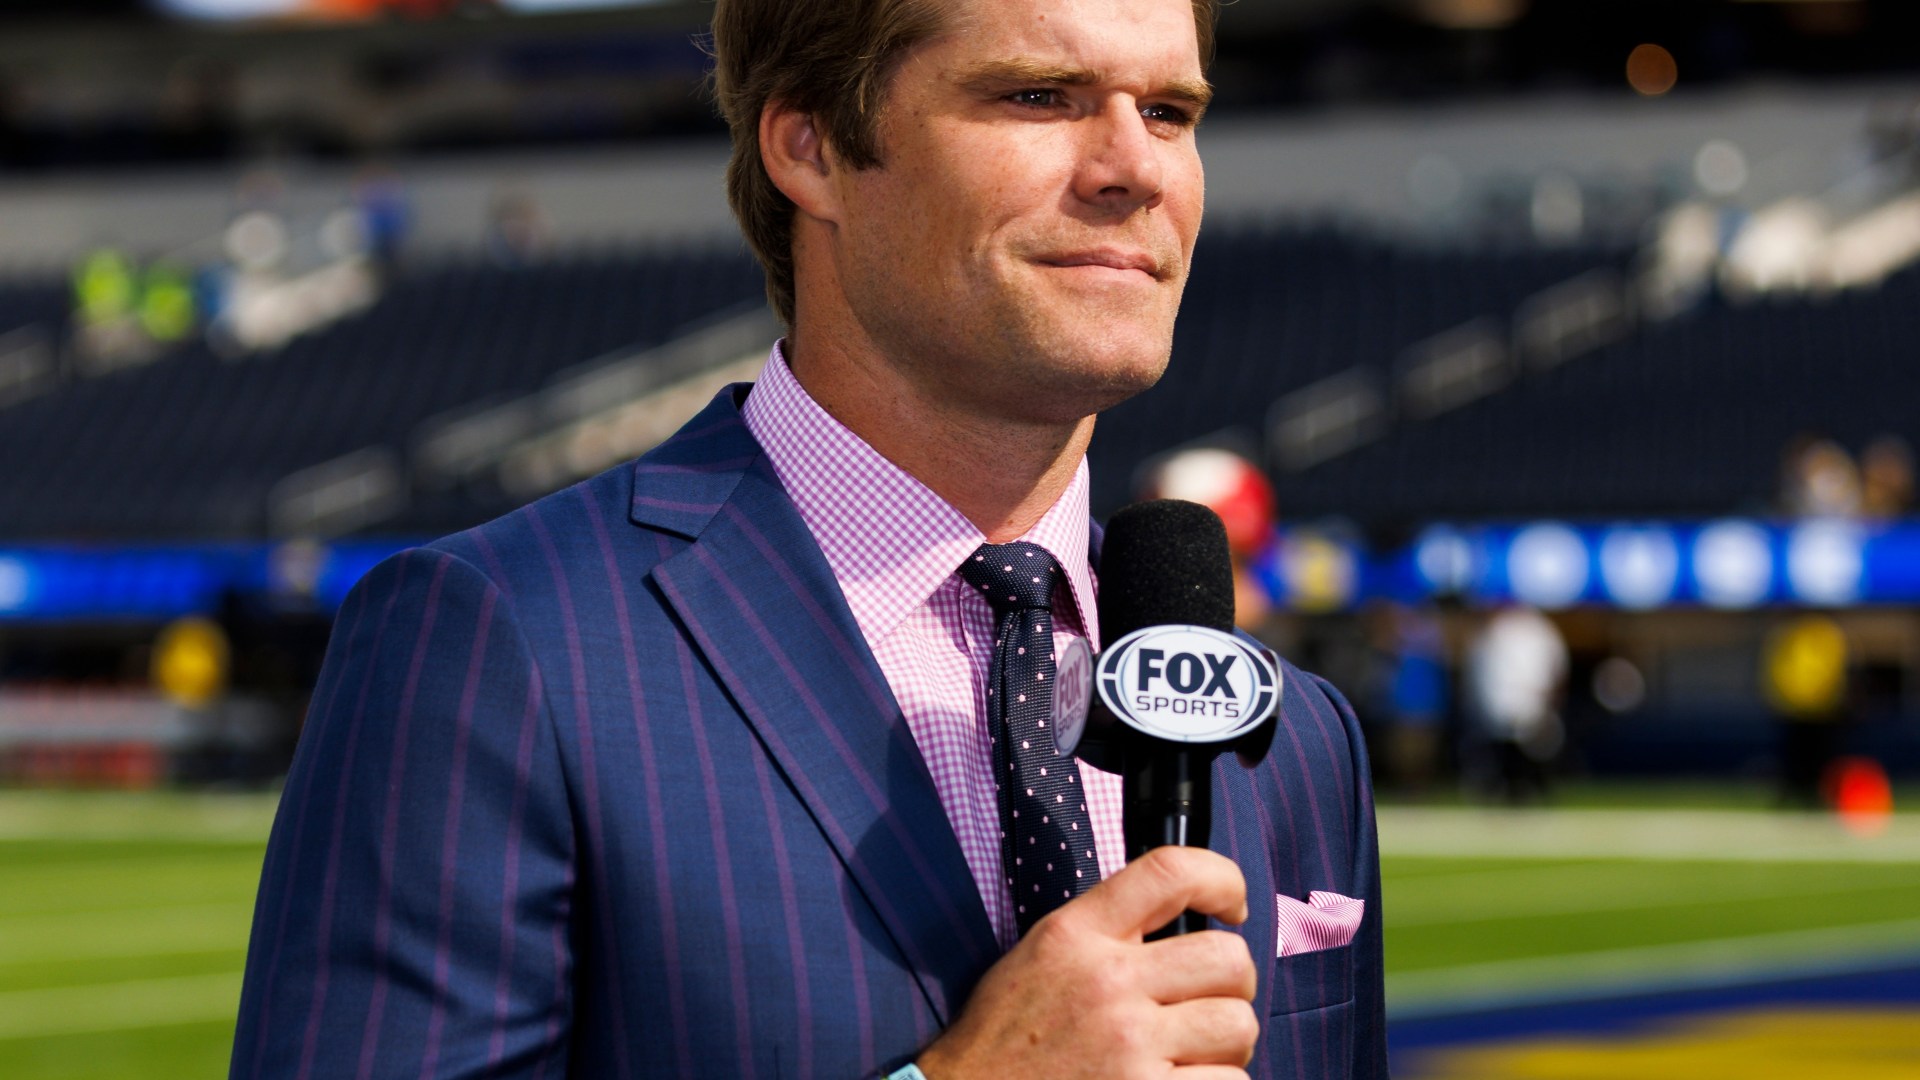 Ex-NFL star Greg Olsen makes major new career change as Fox Sports analyst prepares to be replaced in broadcast booth [Video]